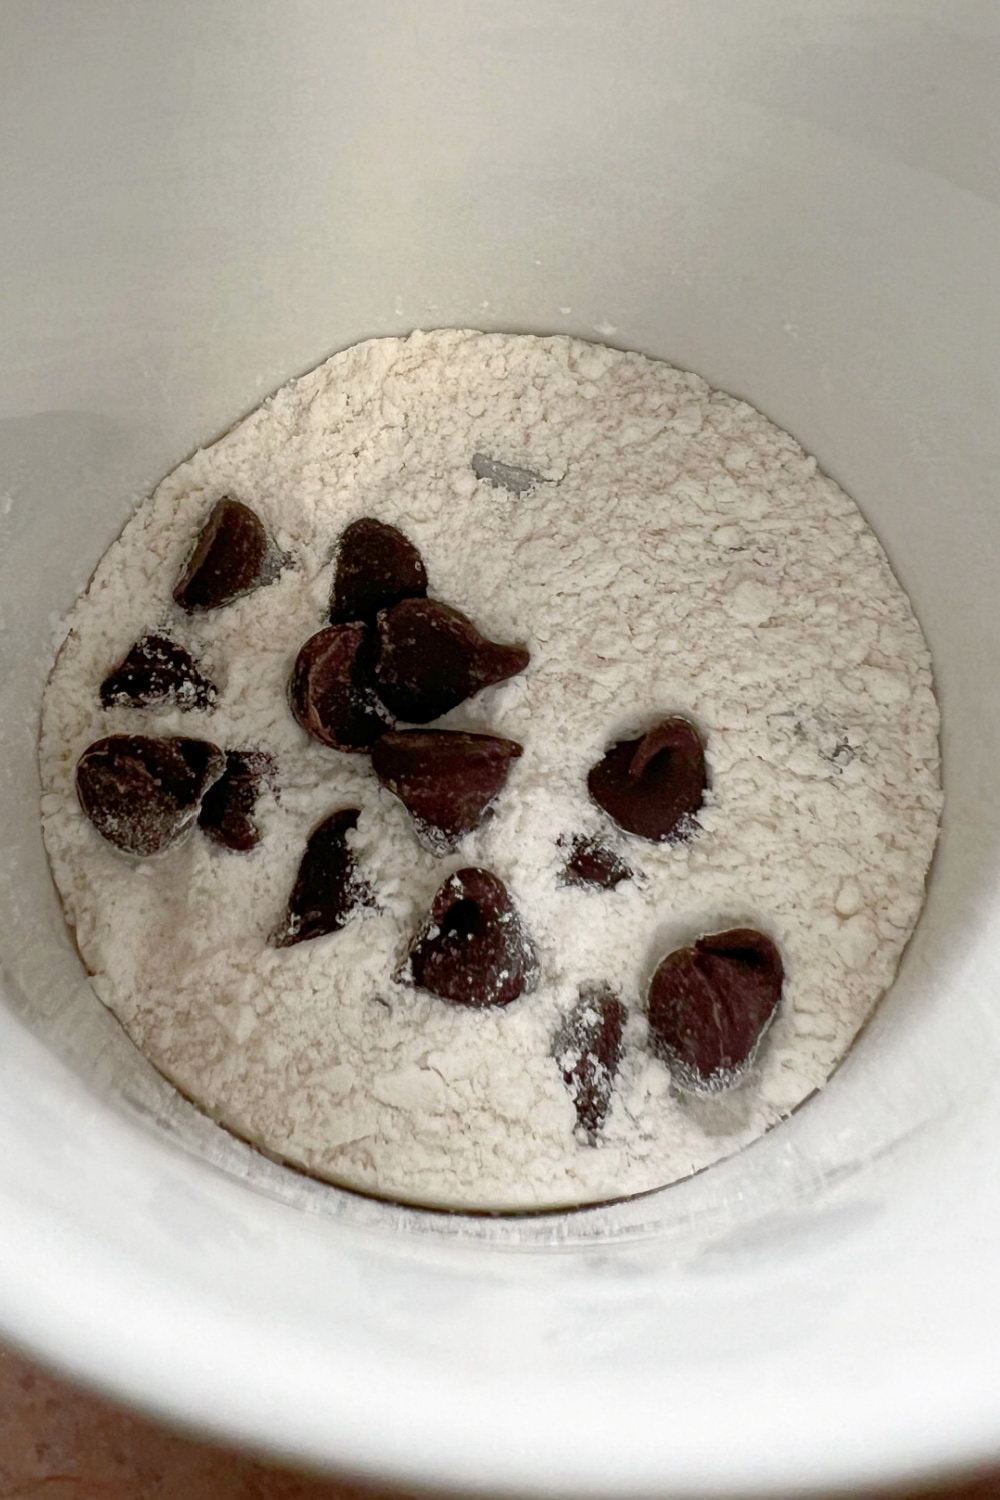 Dry ingredients with chocolate chips in a white cup. 